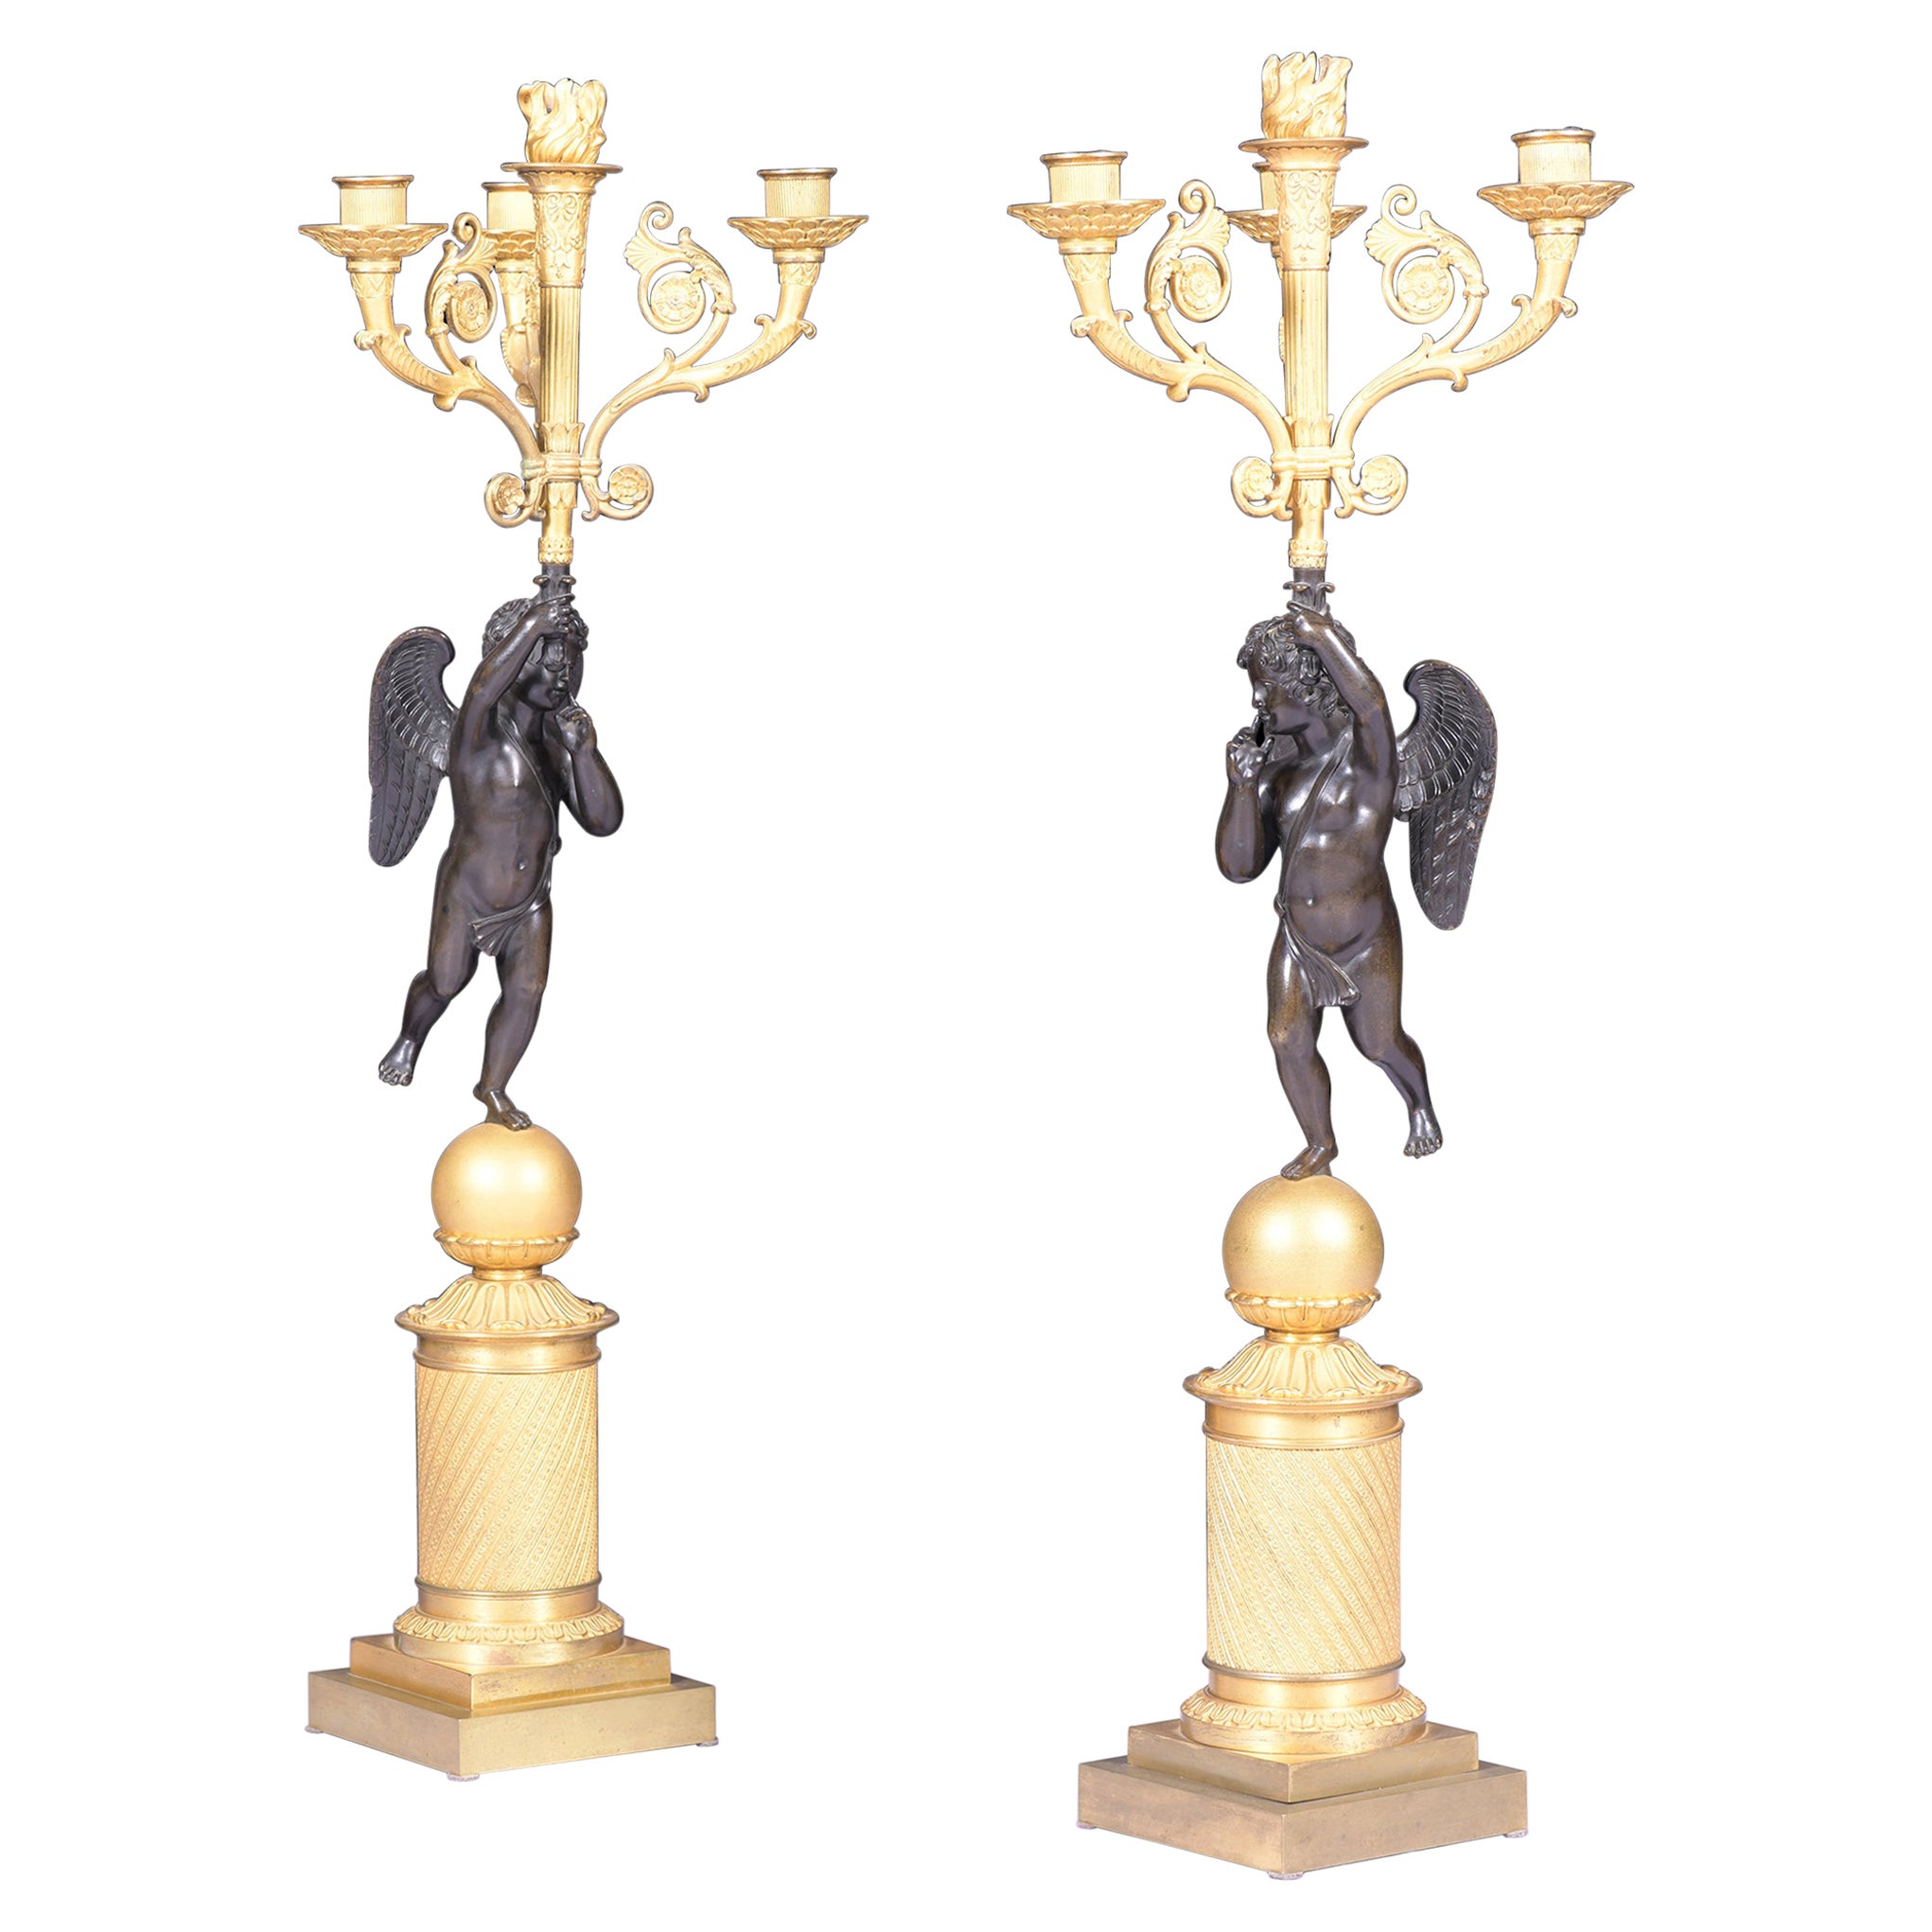 Pair of Early 19th Century French Ormolu & Bronze Empire Period Candelabra